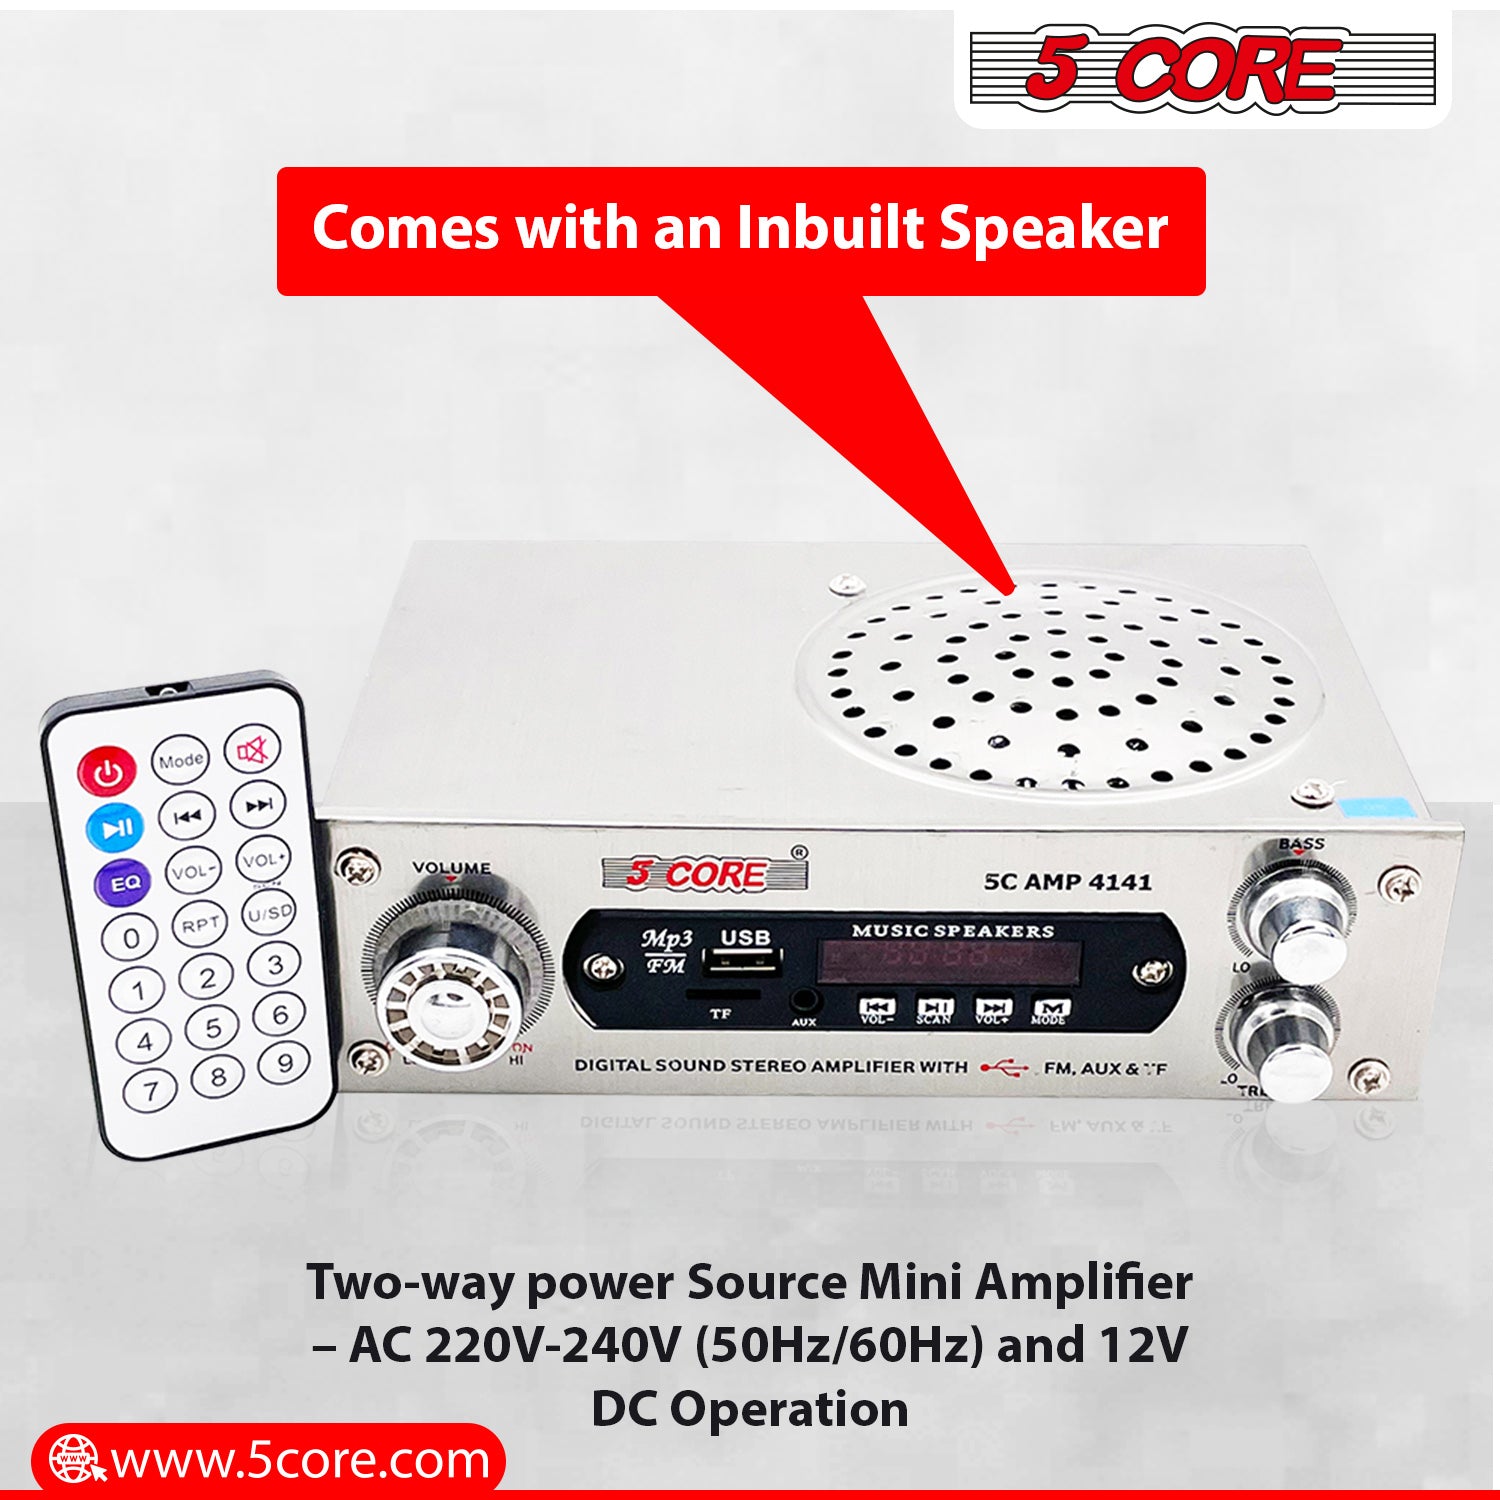 5Core Amplifier Home Audio 400W in-Built Speaker Mini Stereo Dual Channel LCD Display TF AUX USB